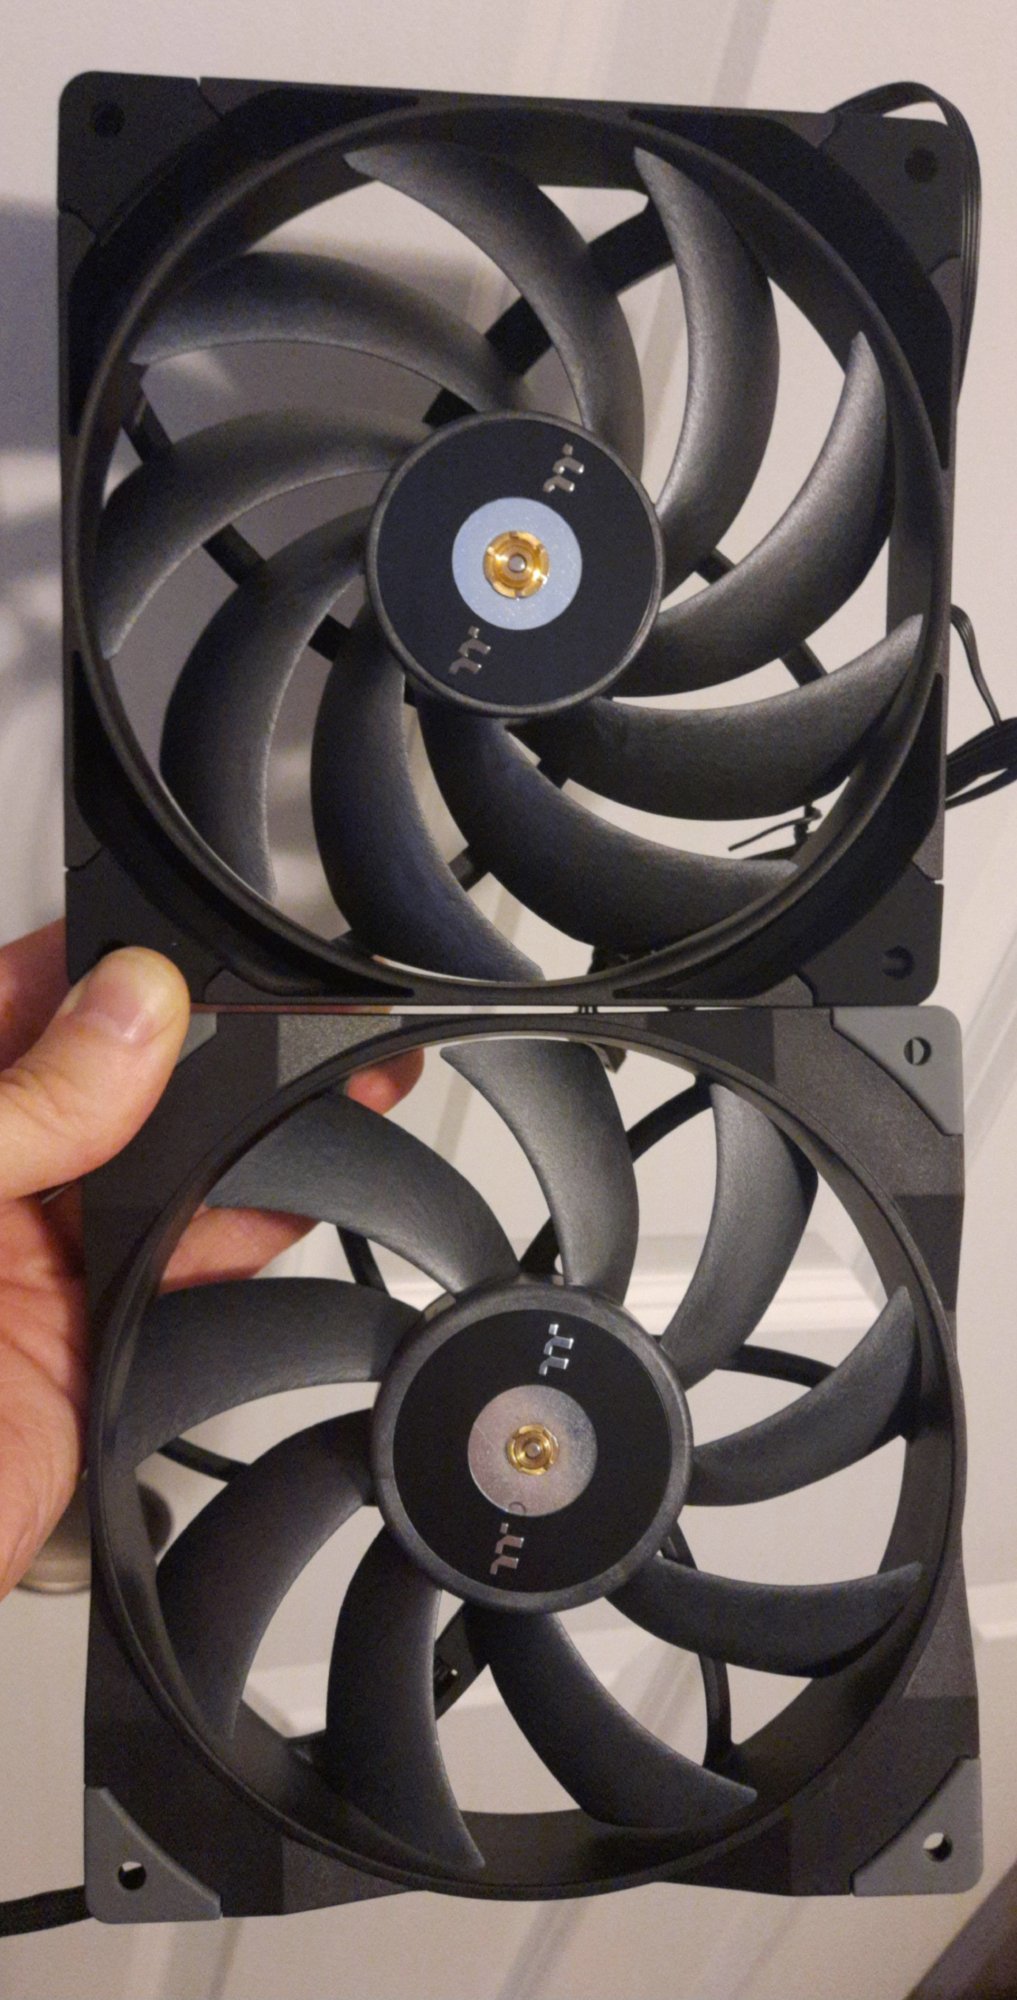 I got a pair of Thermaltake Toughfan 14 Pro, to replace the